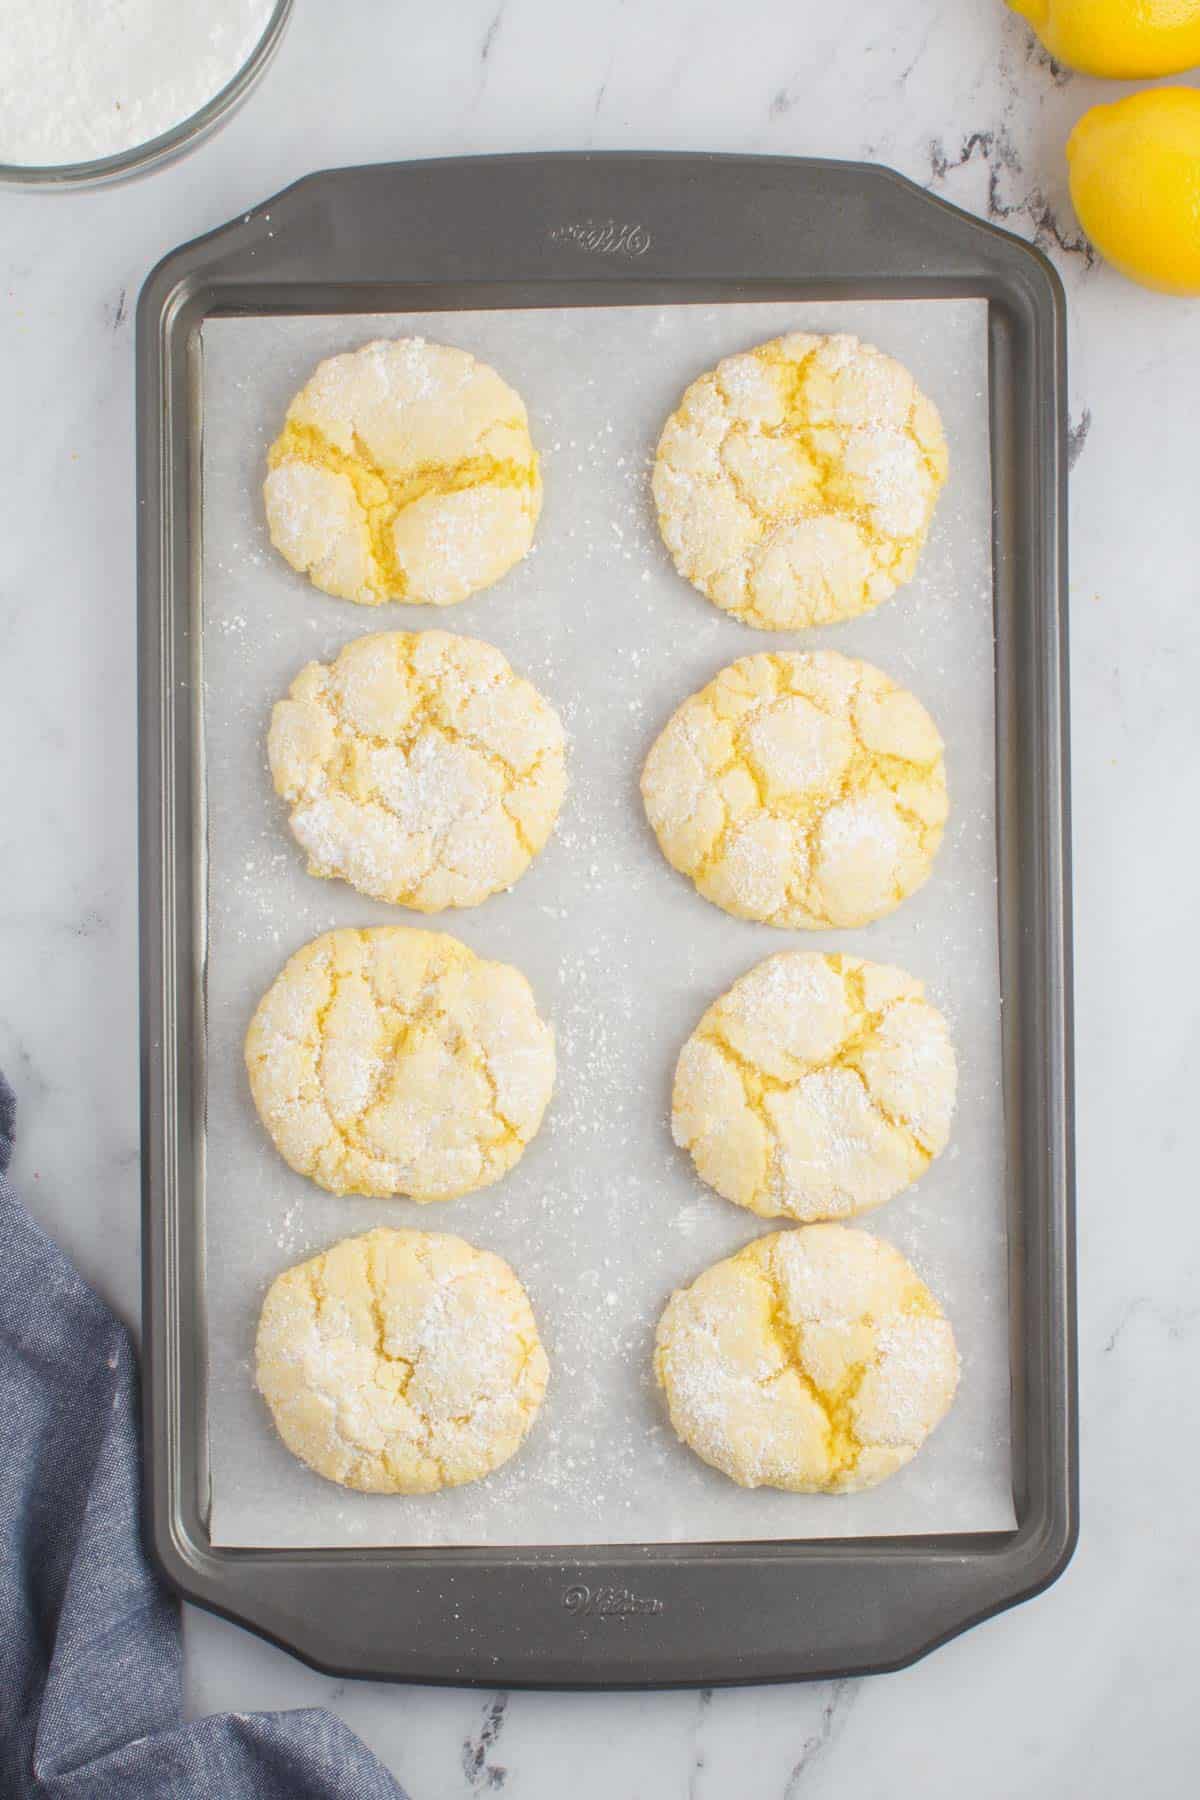 eight lemon cake mix cookies on a baking sheet lined with parchment paper sitting on a granite counter